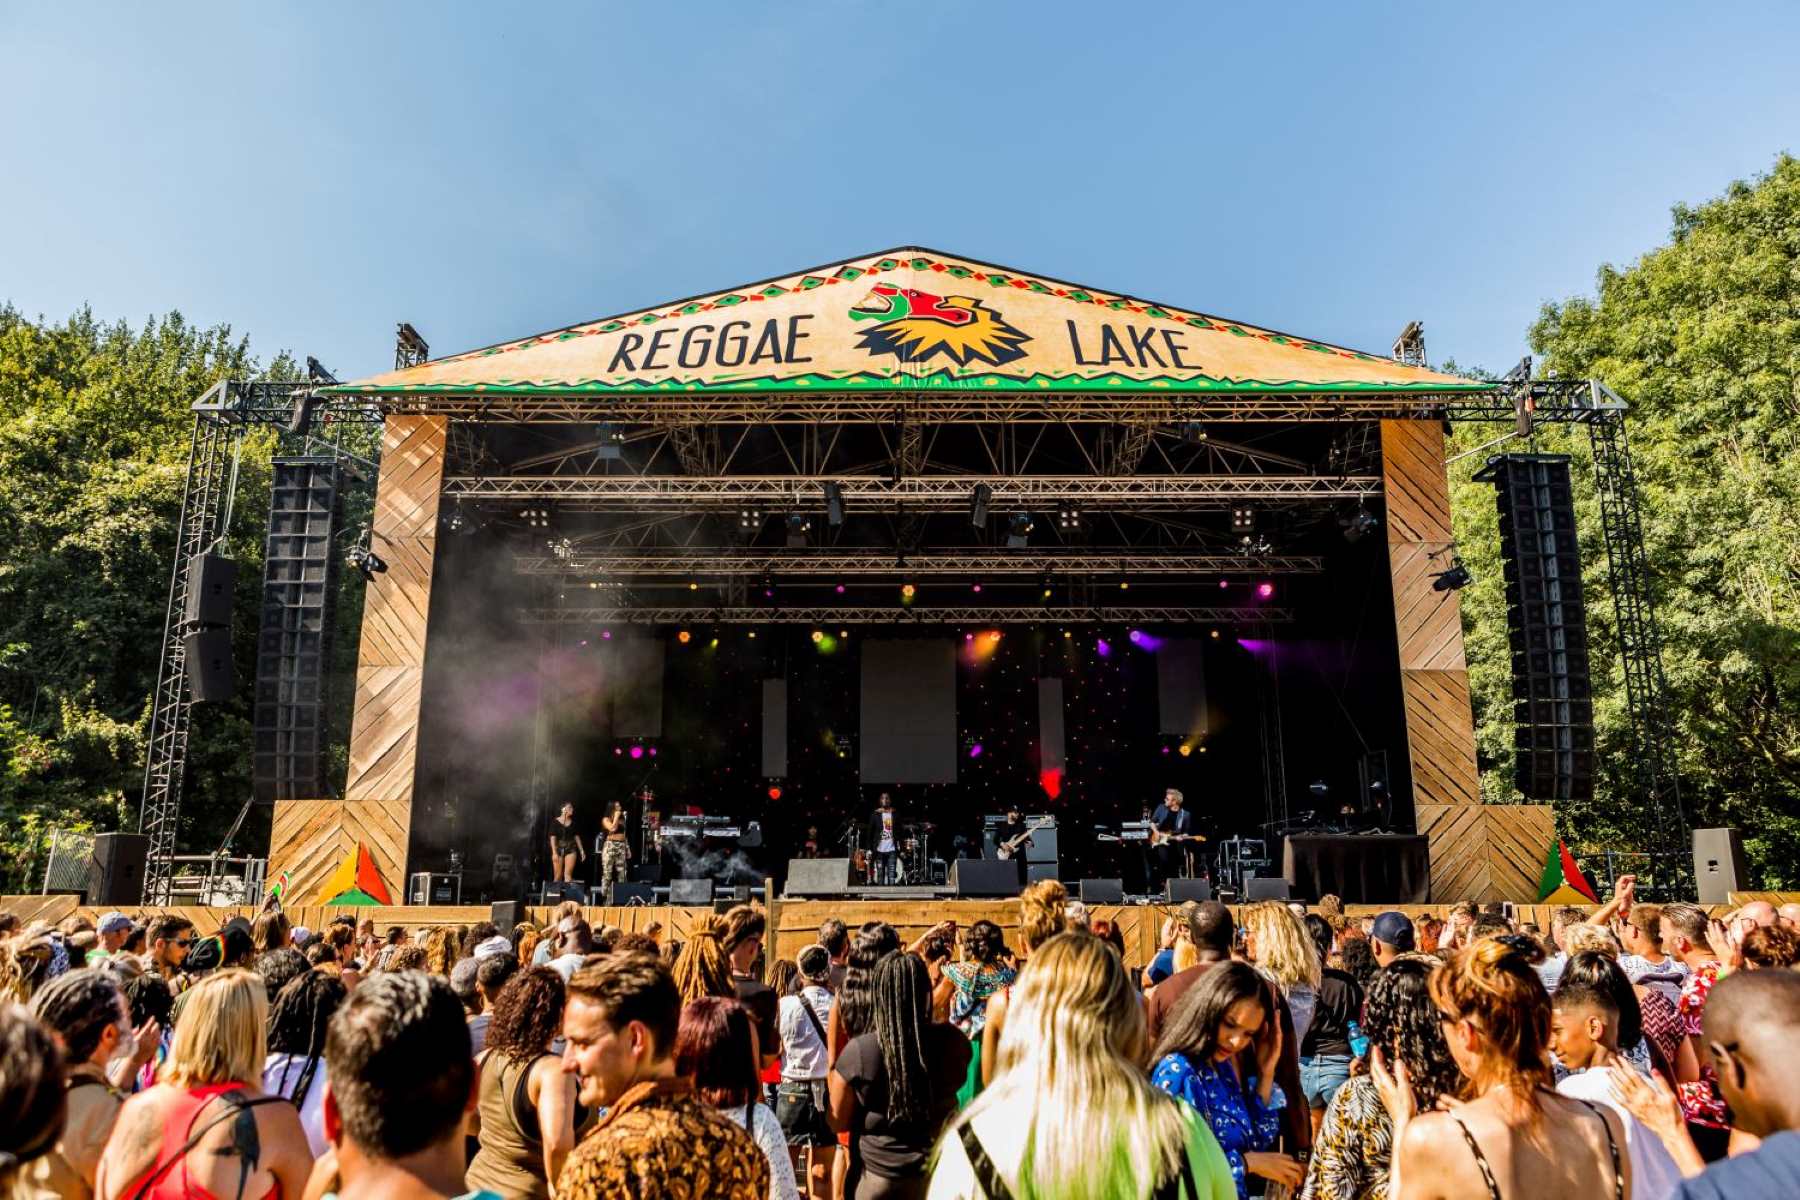 What To Bring To A Reggae Festival